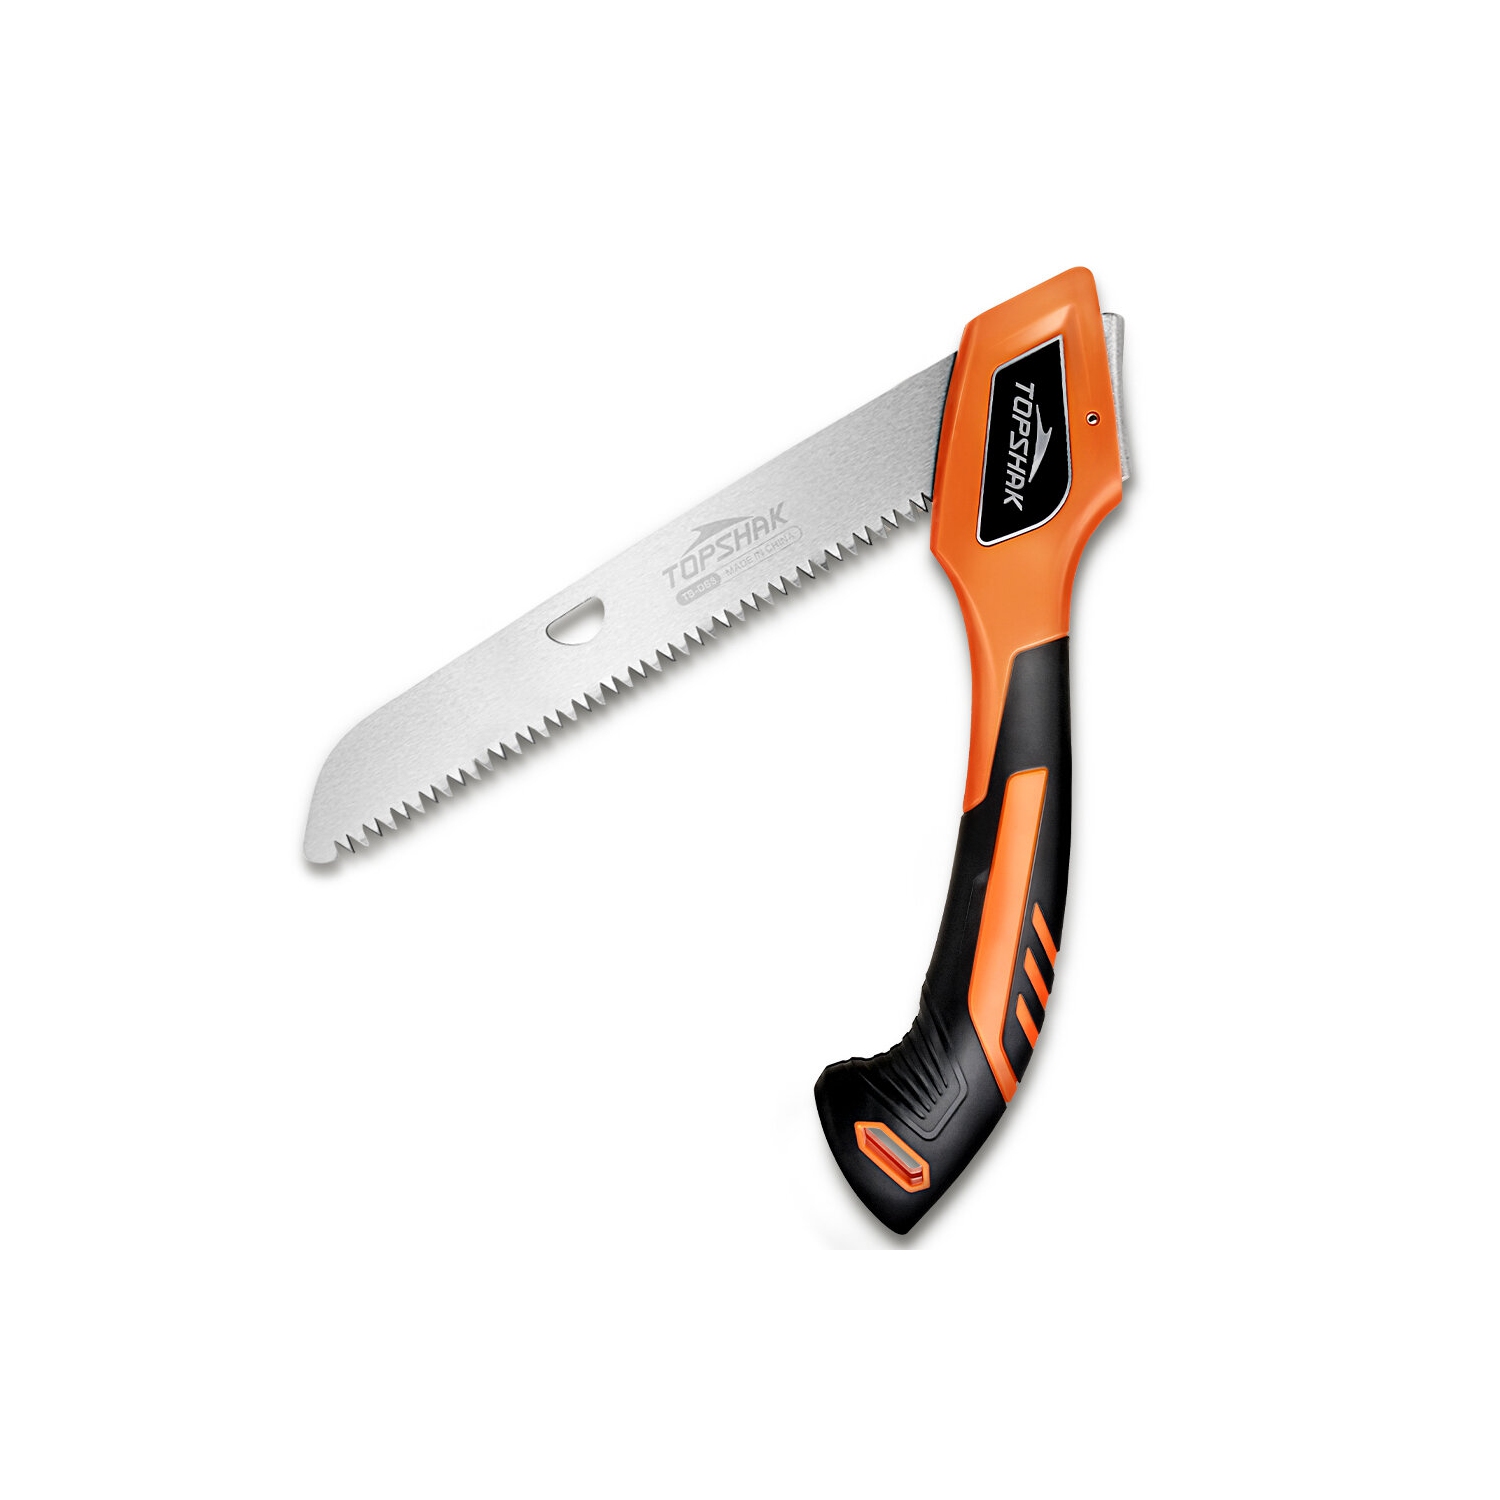 TOPSHAK TS-DS3 10Inches 250mm Folding Saw for SmoothlyFulfilltheTasksofYardWork,Pruning Hunting